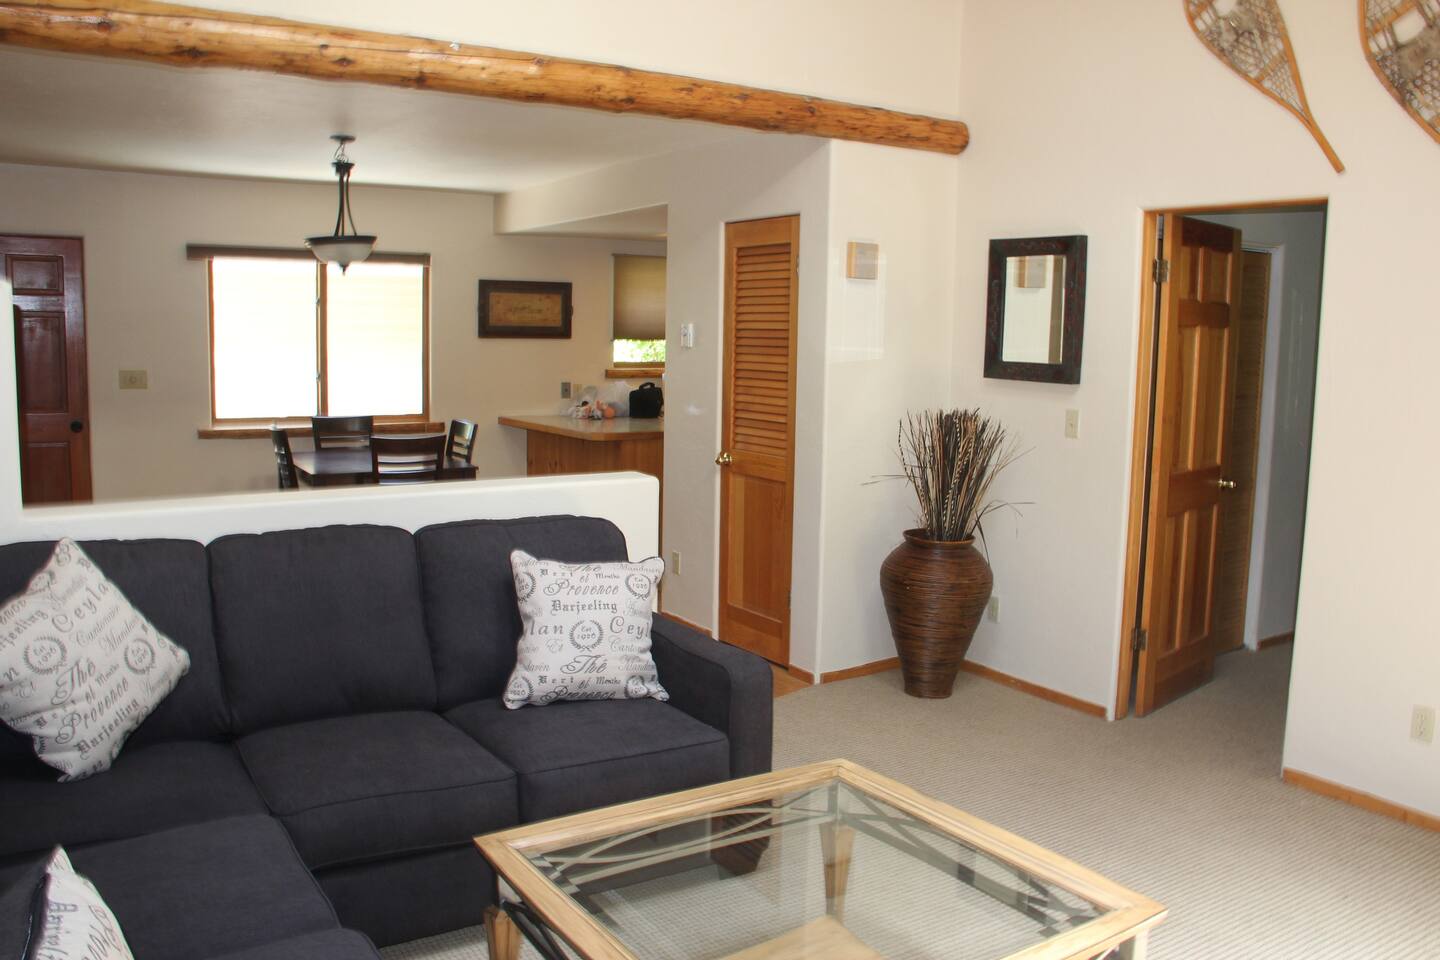 Ranch At The Roaring Fork Apartments For Rent In Carbondale